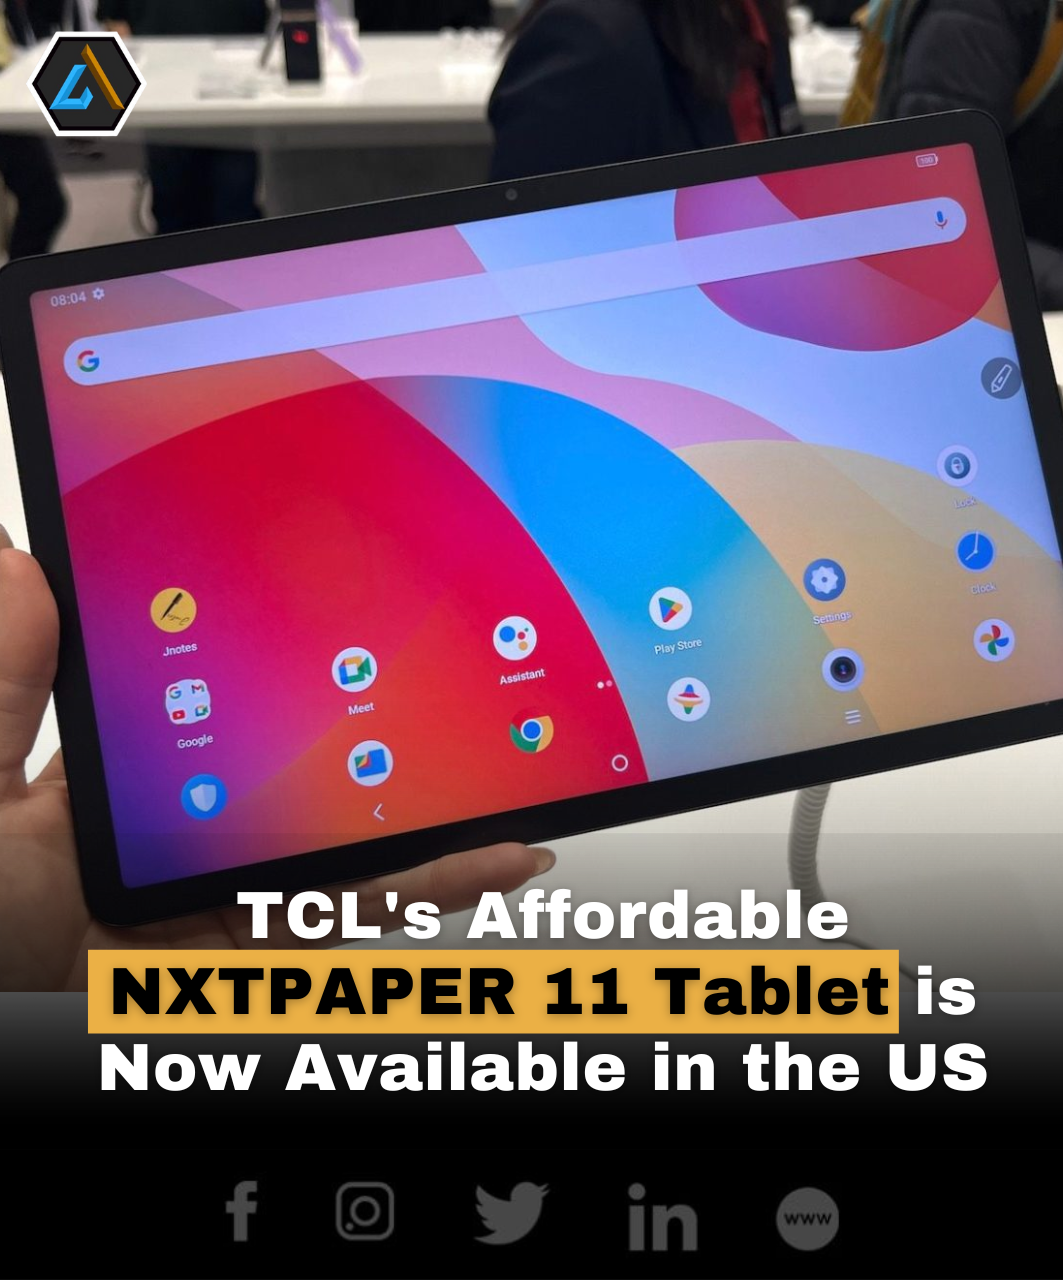 TCL NXTPAPER 11 Tablet: A Paper-Like Display for a More